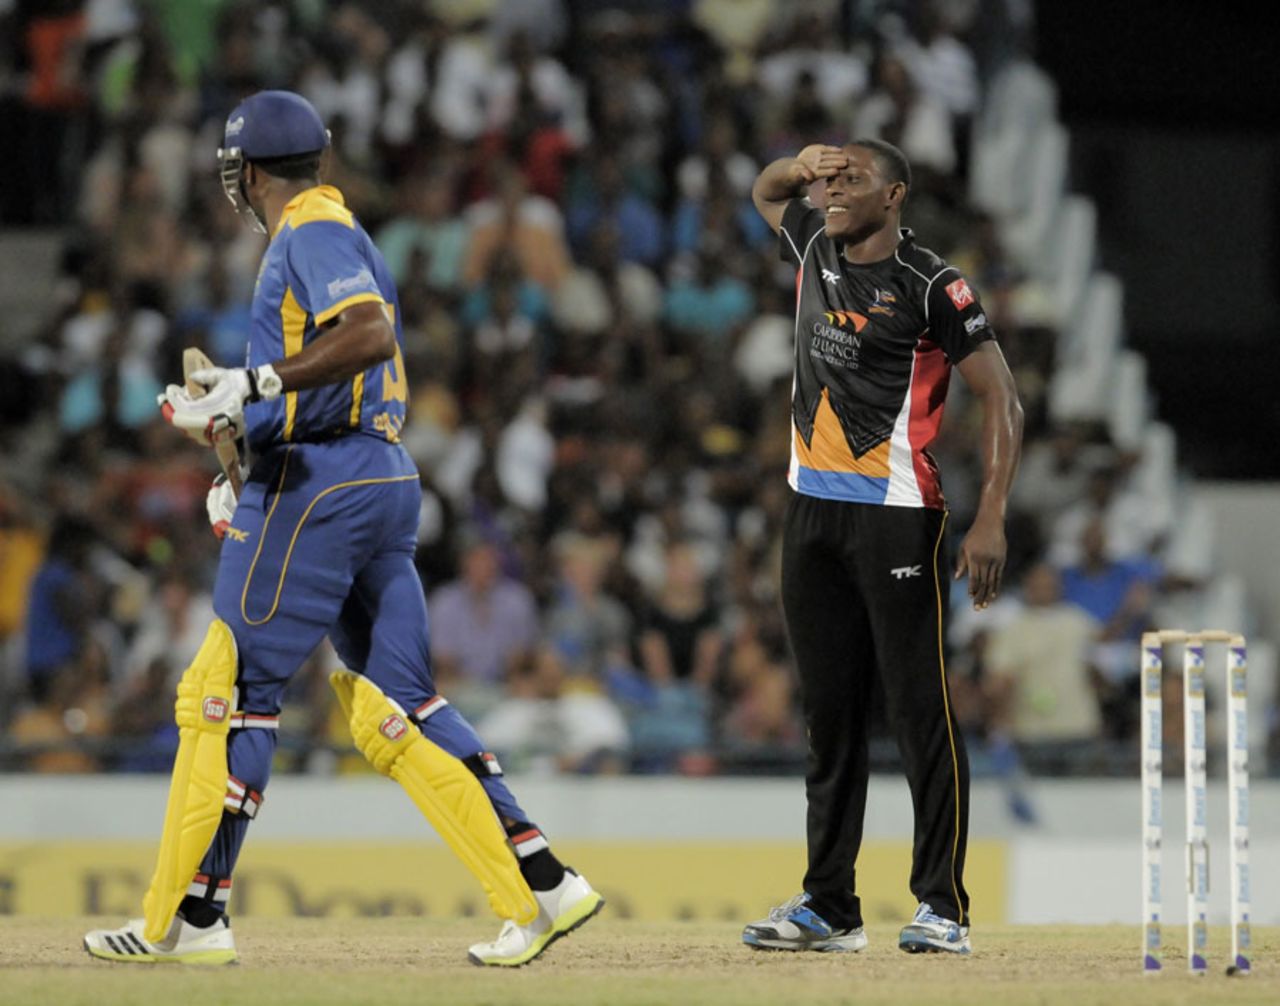 Sheldon Cotterrell picked up two wickets, Barbados Tridents v Antigua Hawksbills, Caribbean Premier League 2013, Bridgetown, August 1, 2013